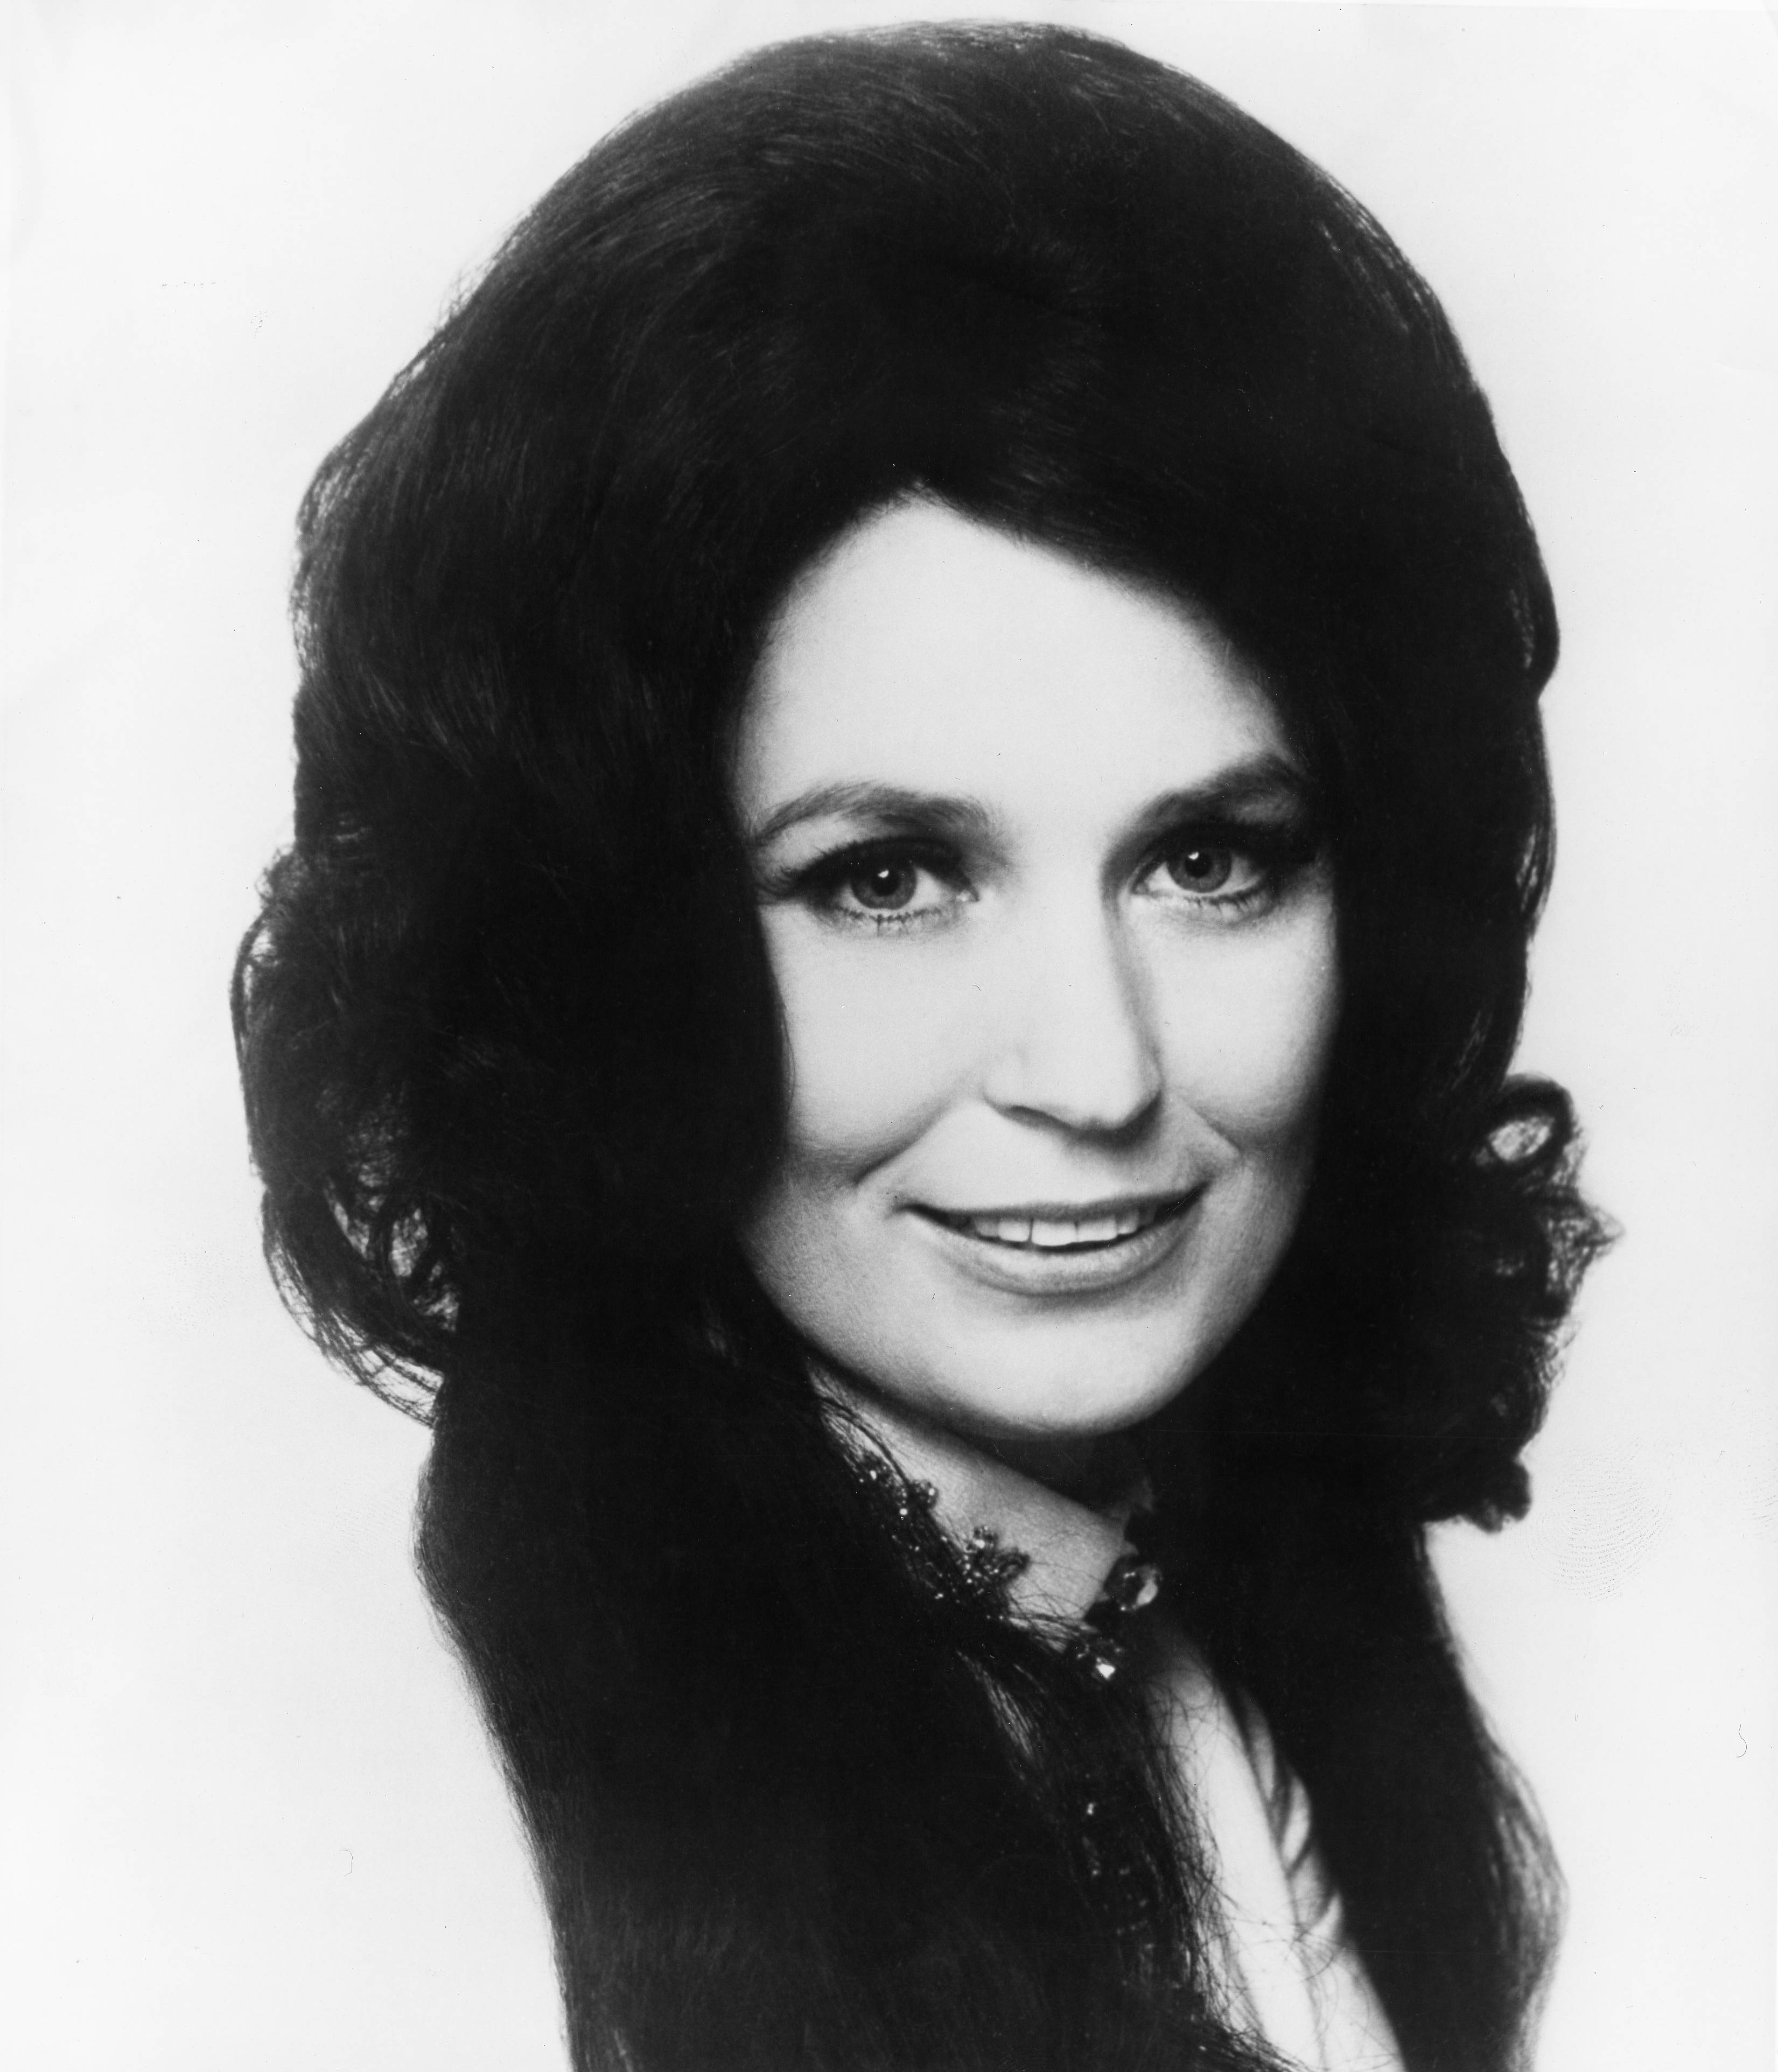 Loretta Lynn's photo flashback: Her life and career in pictures